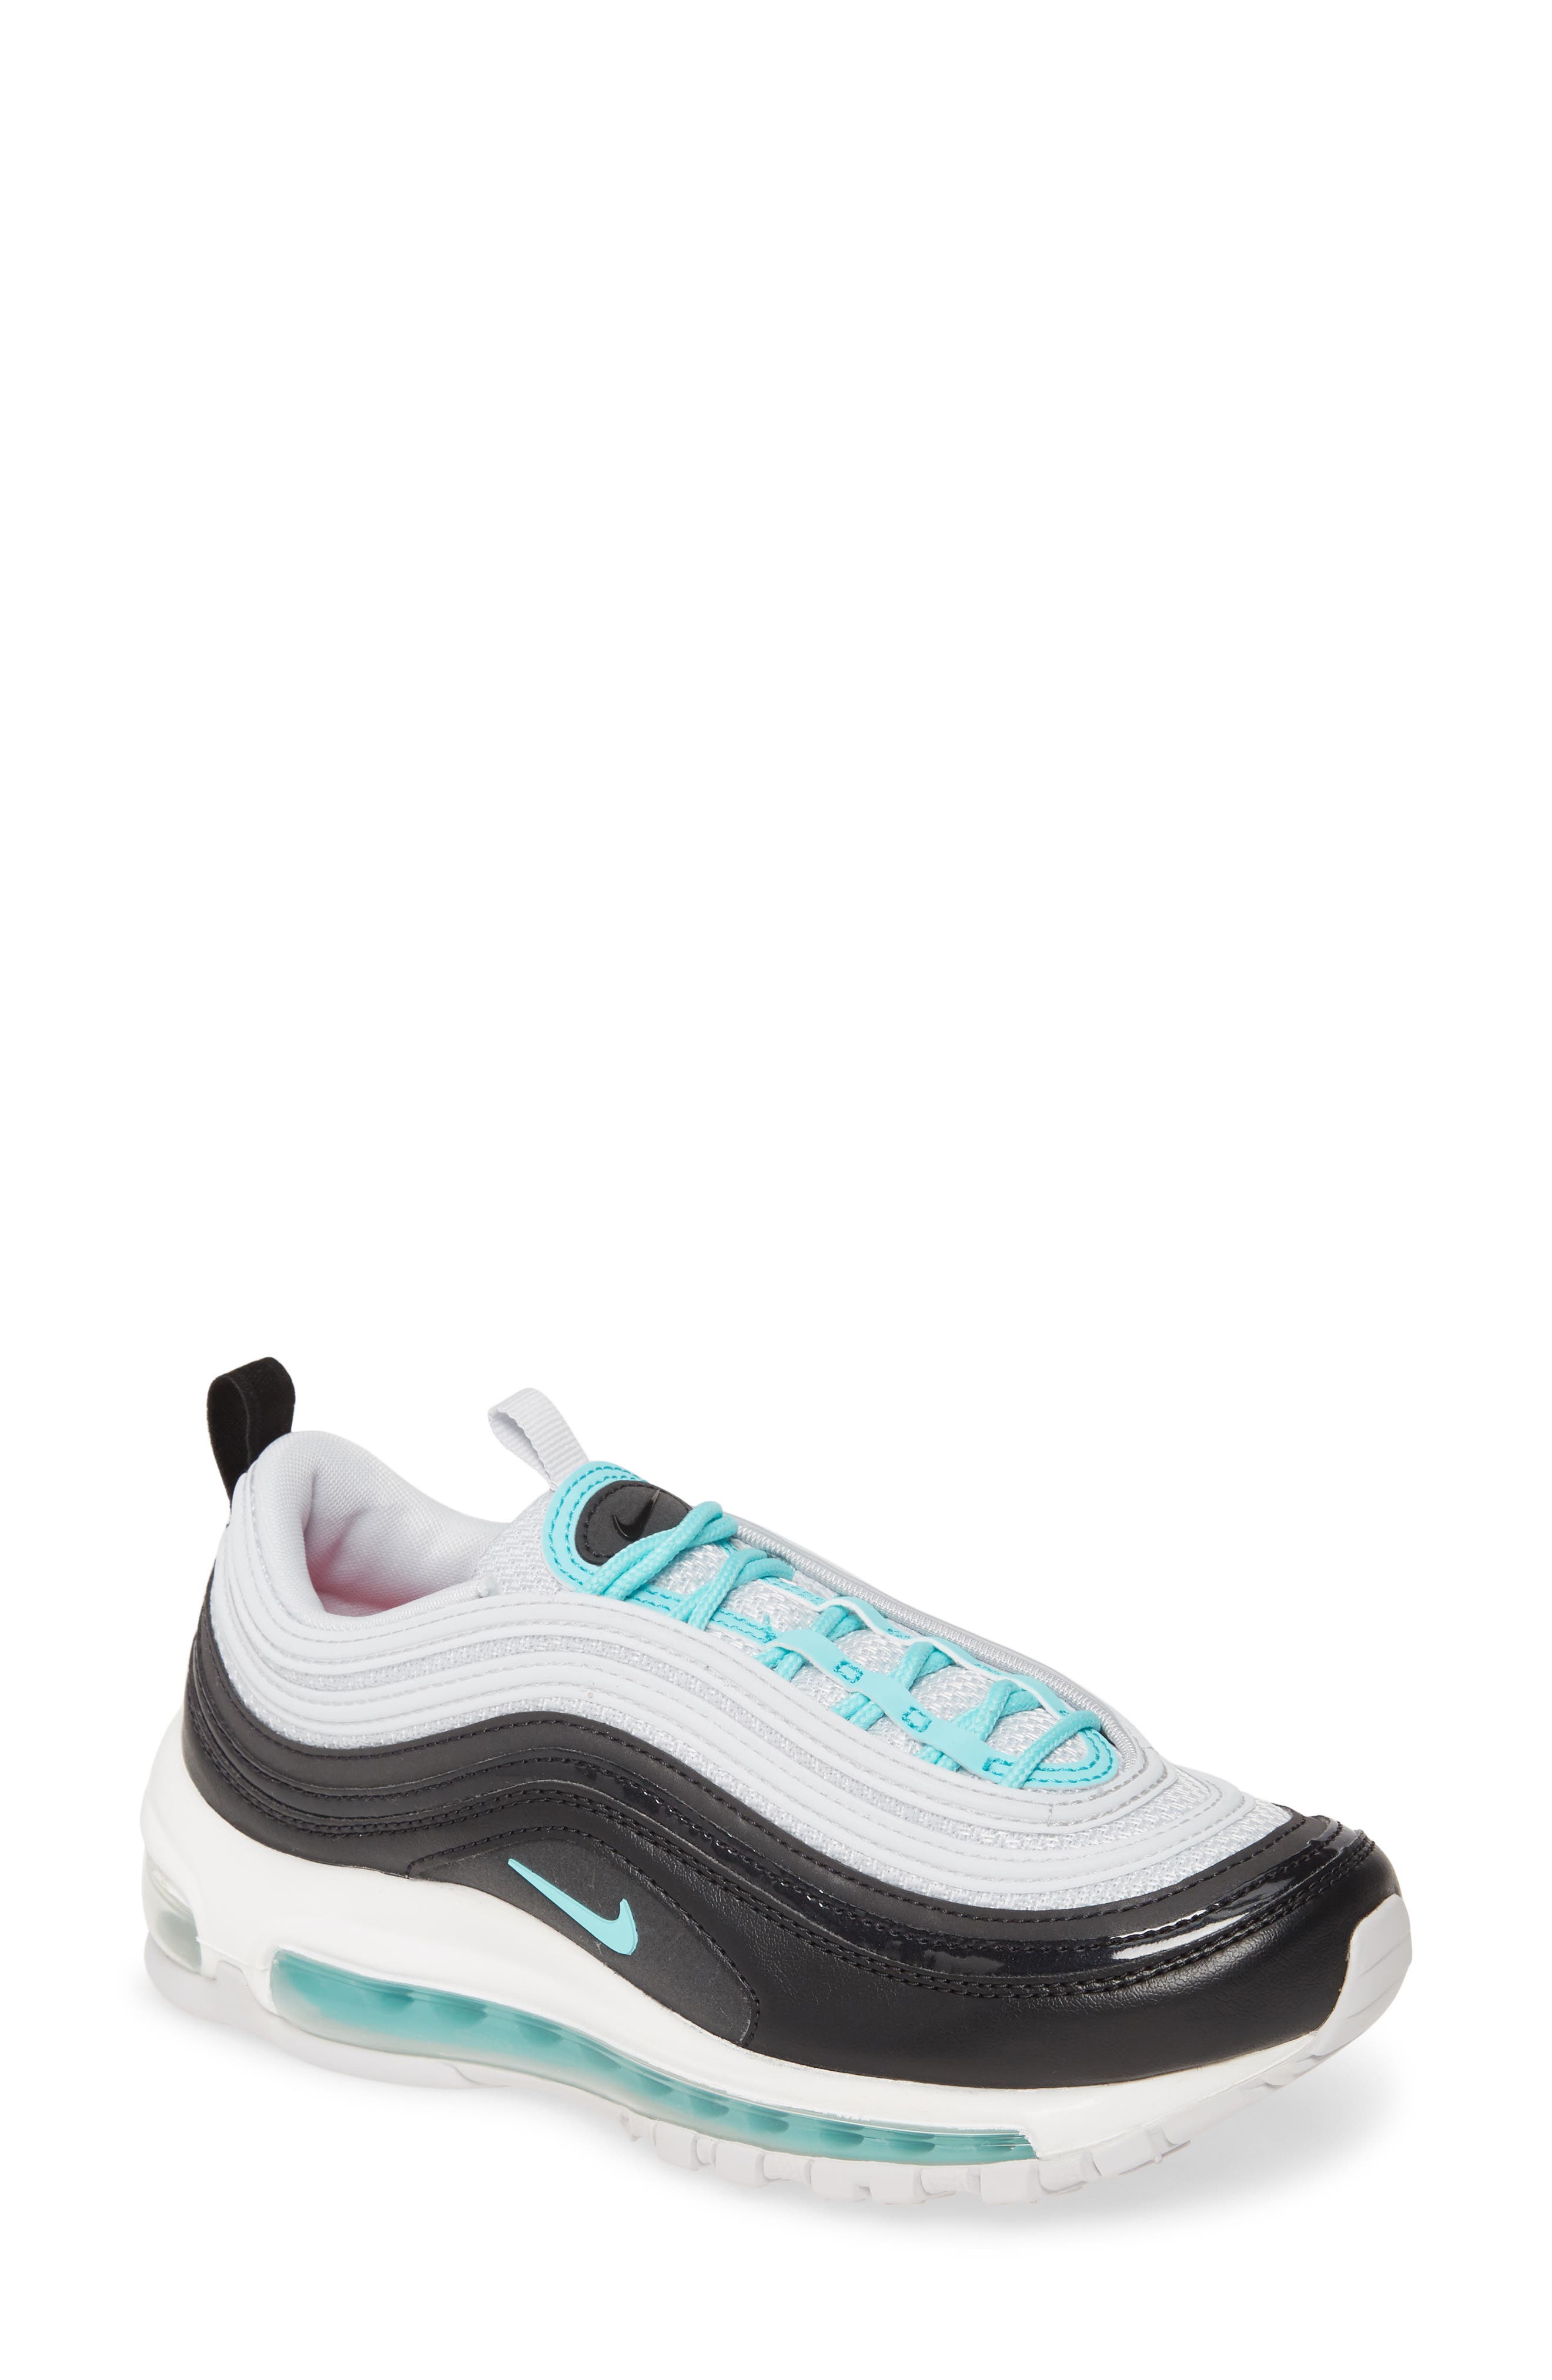 Nike Air Max 97 Nordstrom Cheap Sale, UP TO 60% OFF